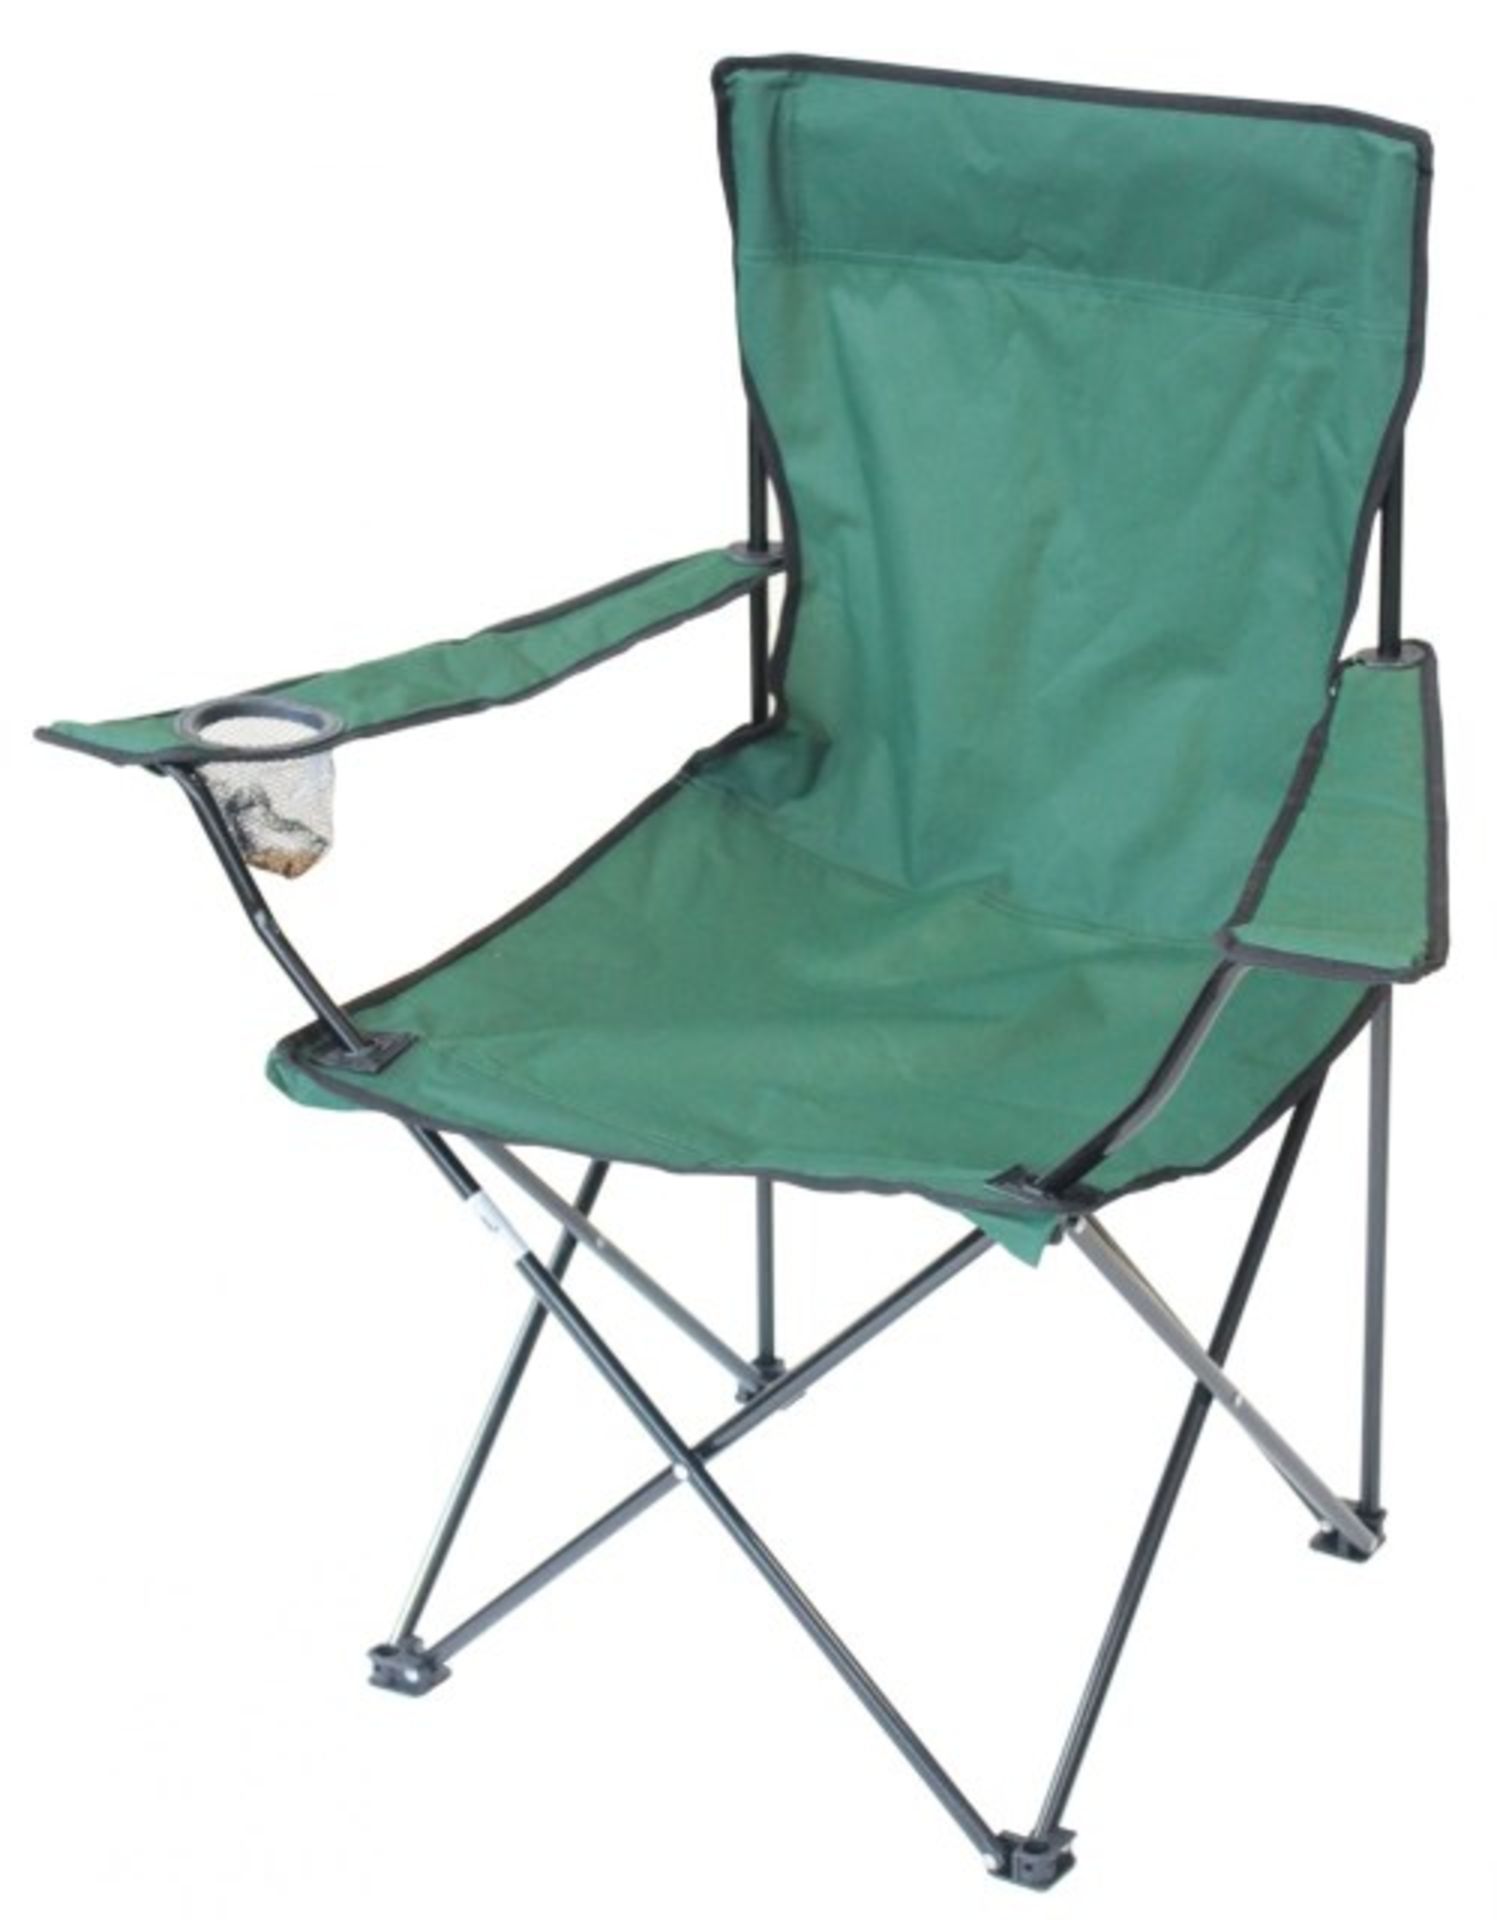 V Folding Camping Chair With Drink Holder In Armrest & Carry Bag - Sturdy Steel Frame (13x.06mm) 2.